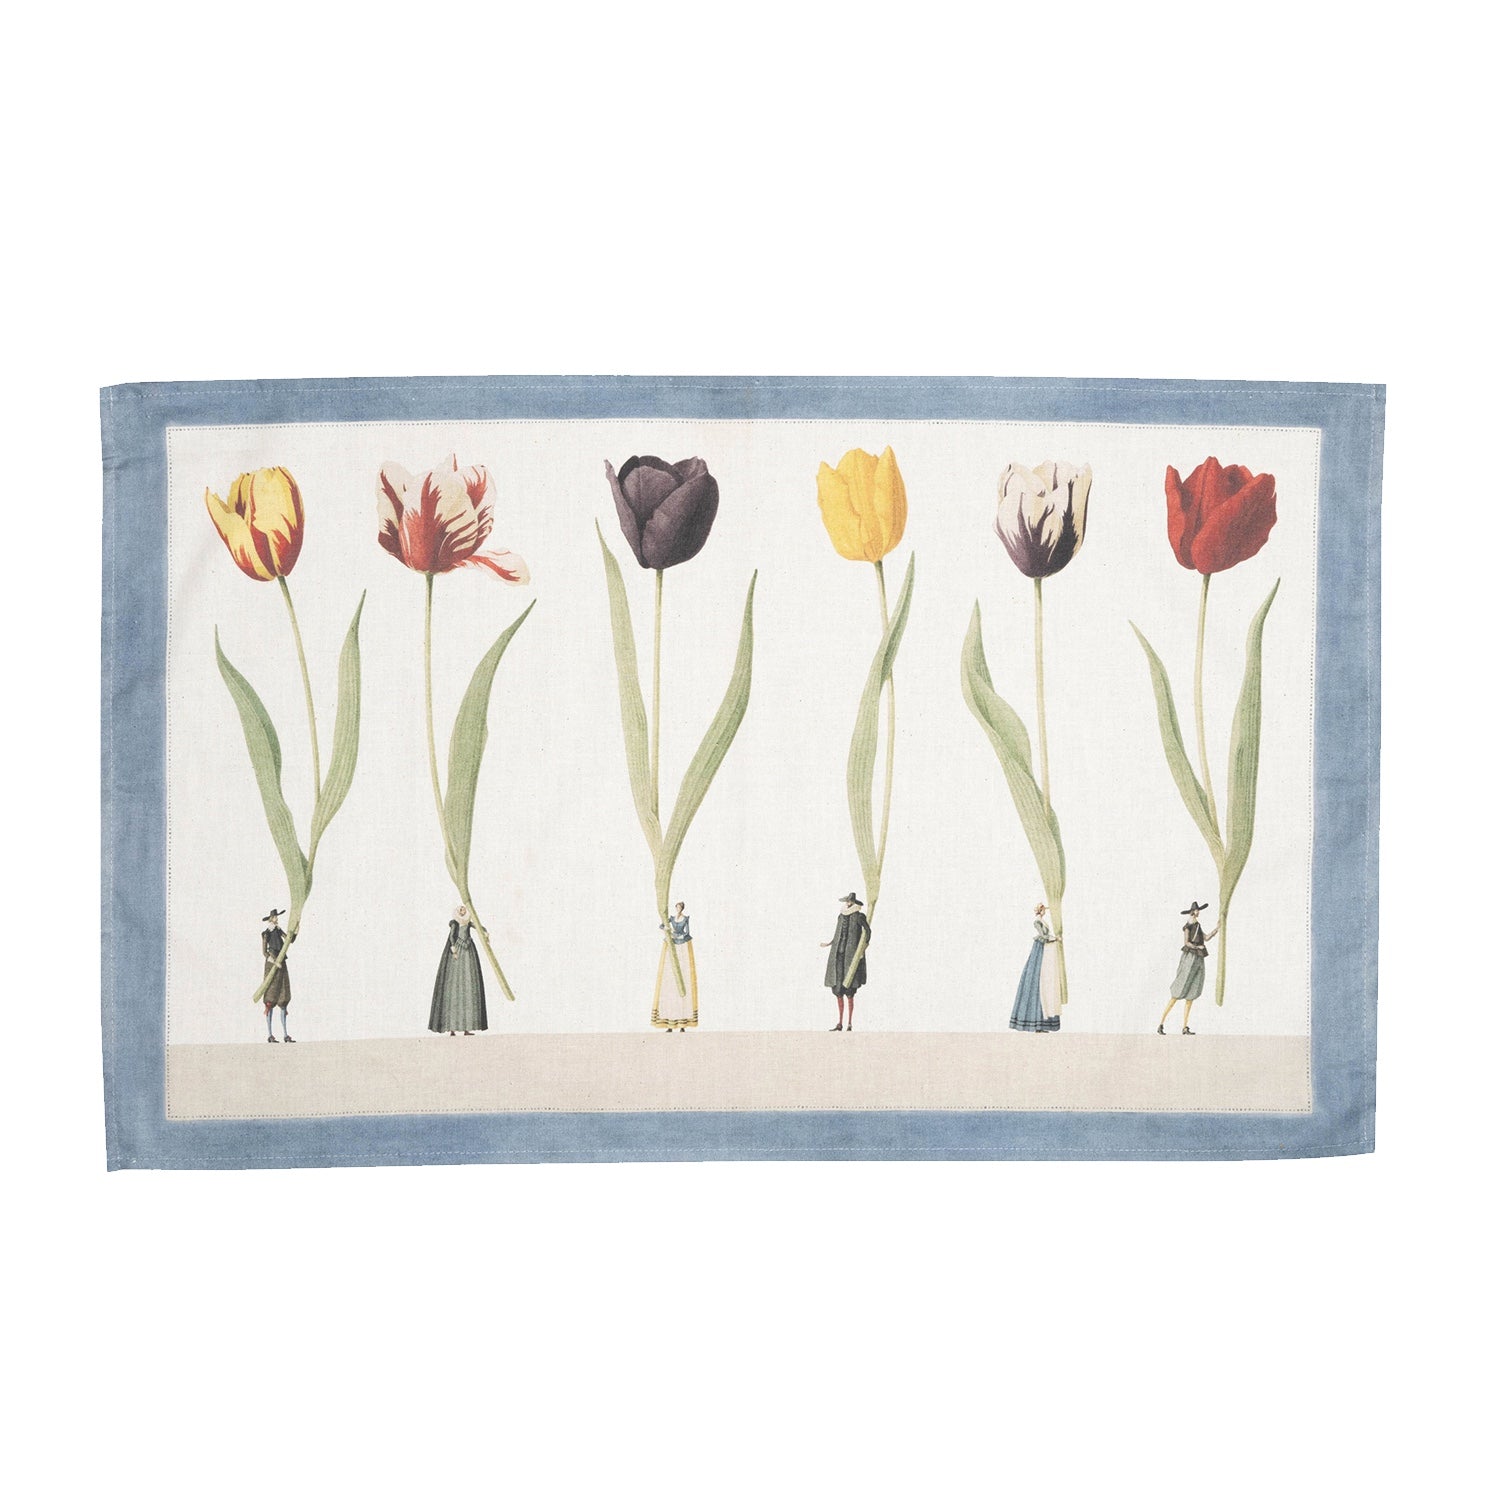 A Hester &amp; Cook Tulip Parade Tea Towel with tulips on it.